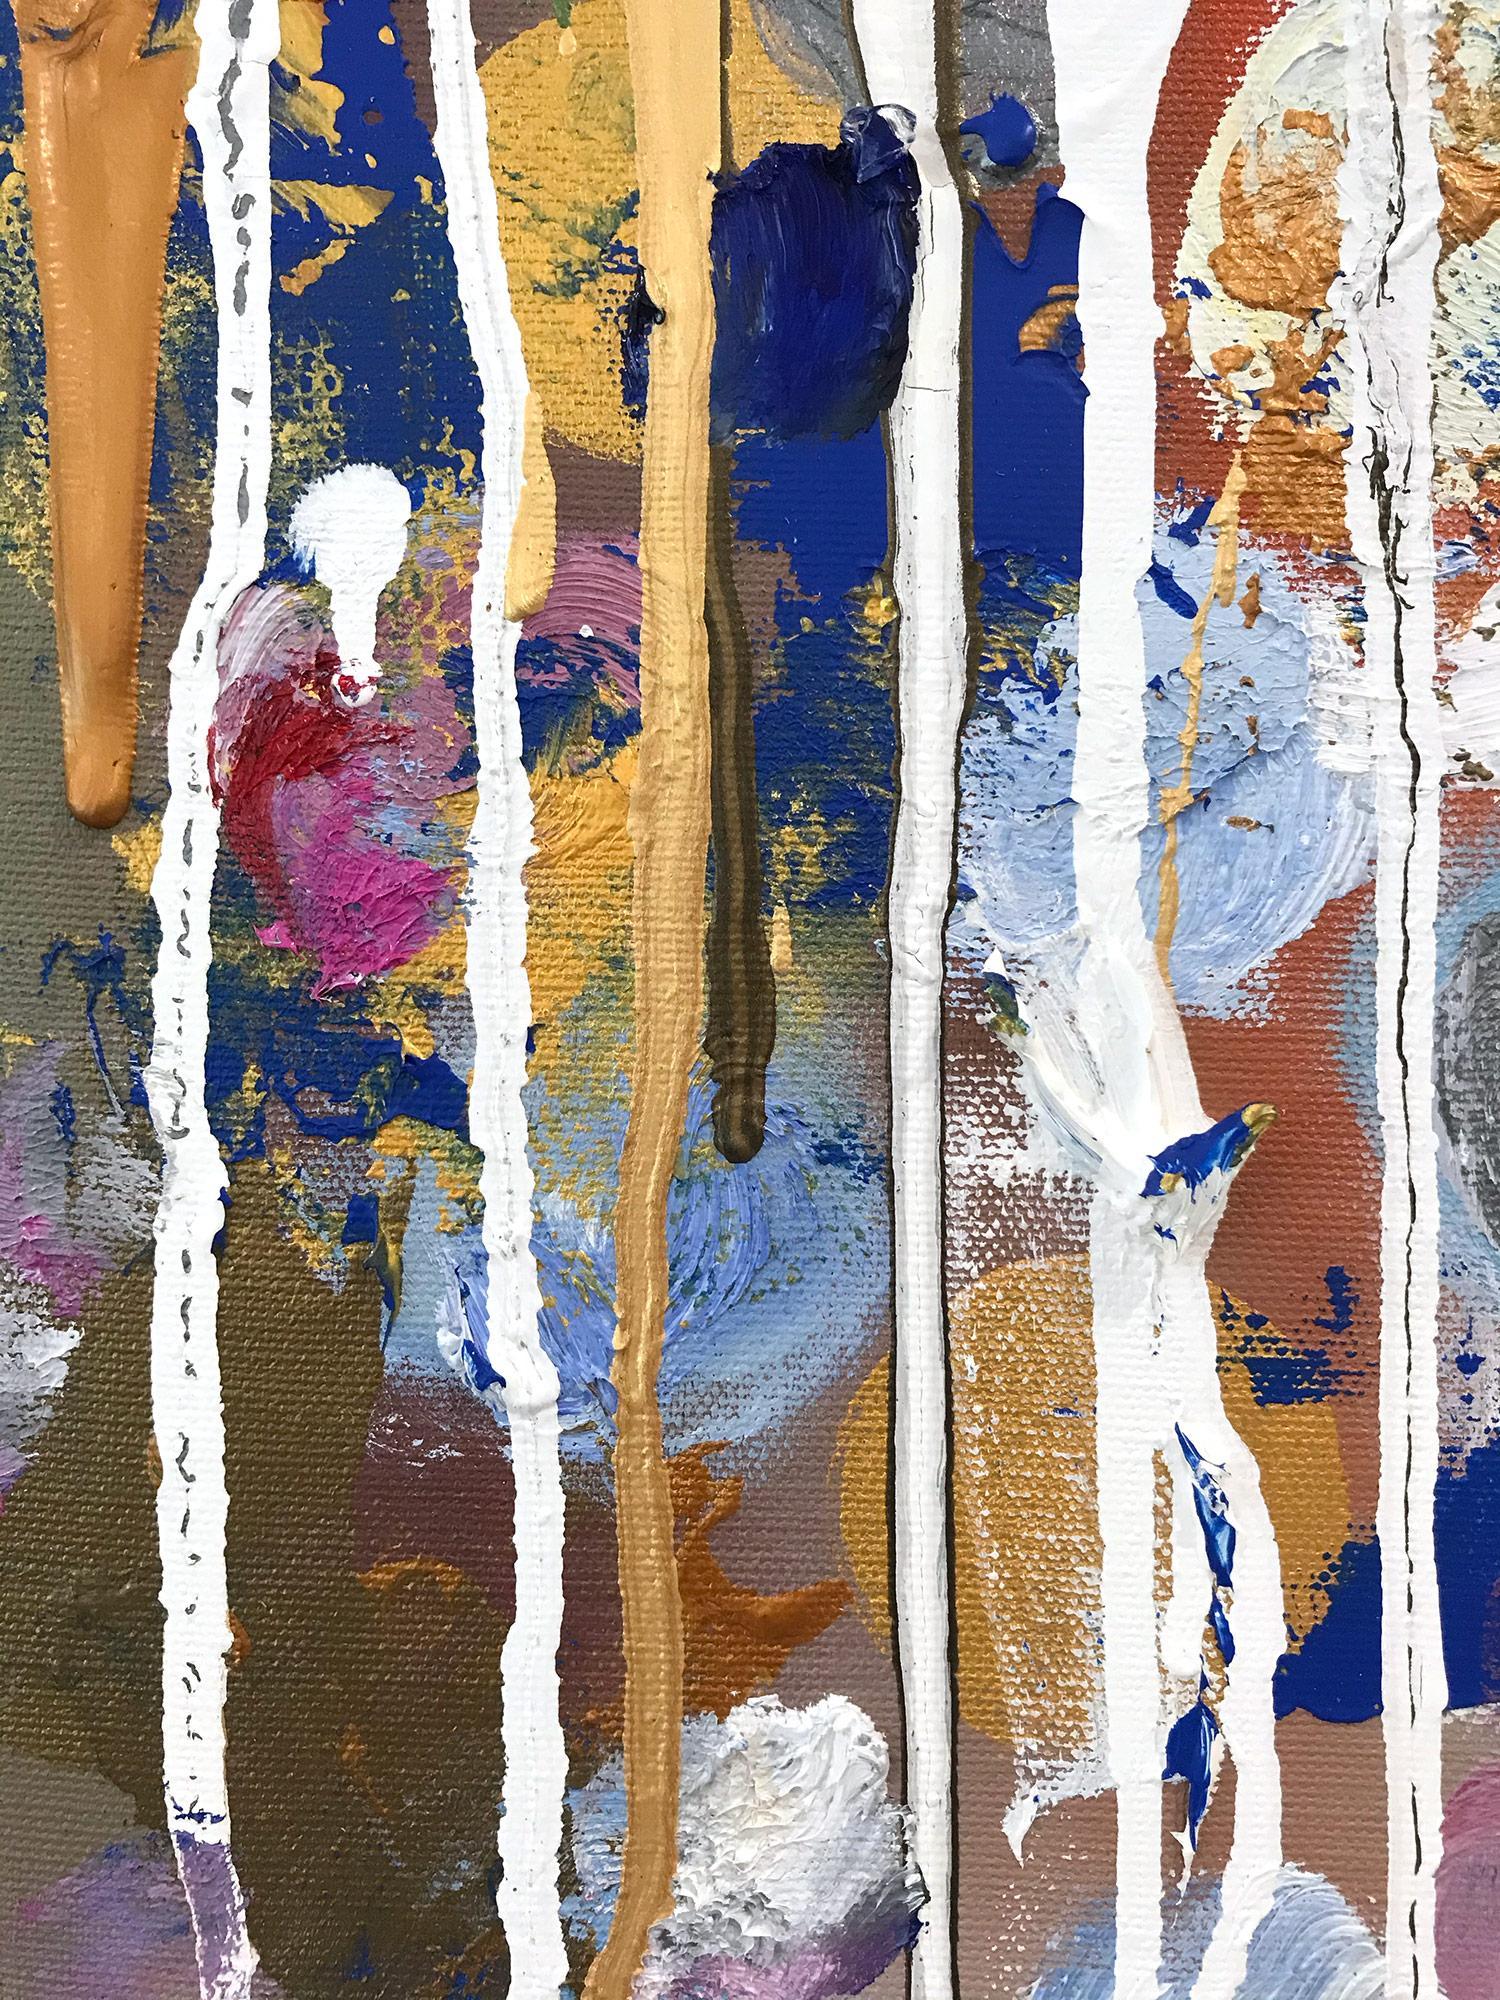 With layers of bright oils and whisking brush strokes, the paint is able to shine and shimmer in a very unique pattern. The artist uses gold drips, mixed media and, pieces of glass to add a very contemporary, Urban feel. The way the paint blends and